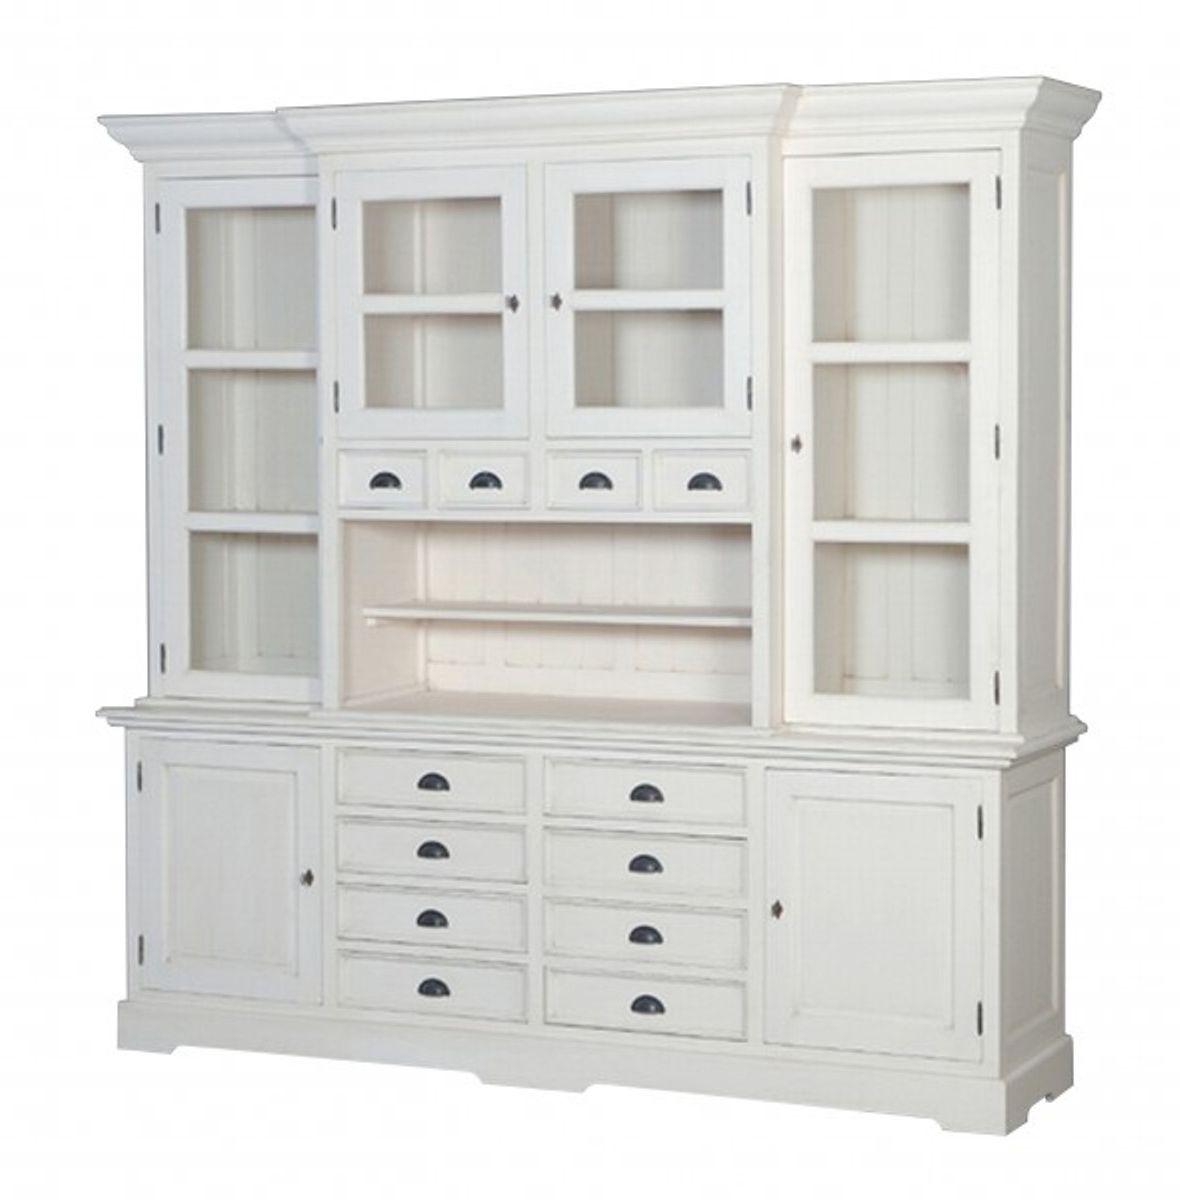 Large Shabby Chic Country House Style Cabinet With 6 Doors And 12 Drawers –  Buffet Cabinet – Wardrobe Dining Room | Casa Padrino For Large Shabby Chic Wardrobes (Gallery 1 of 20)